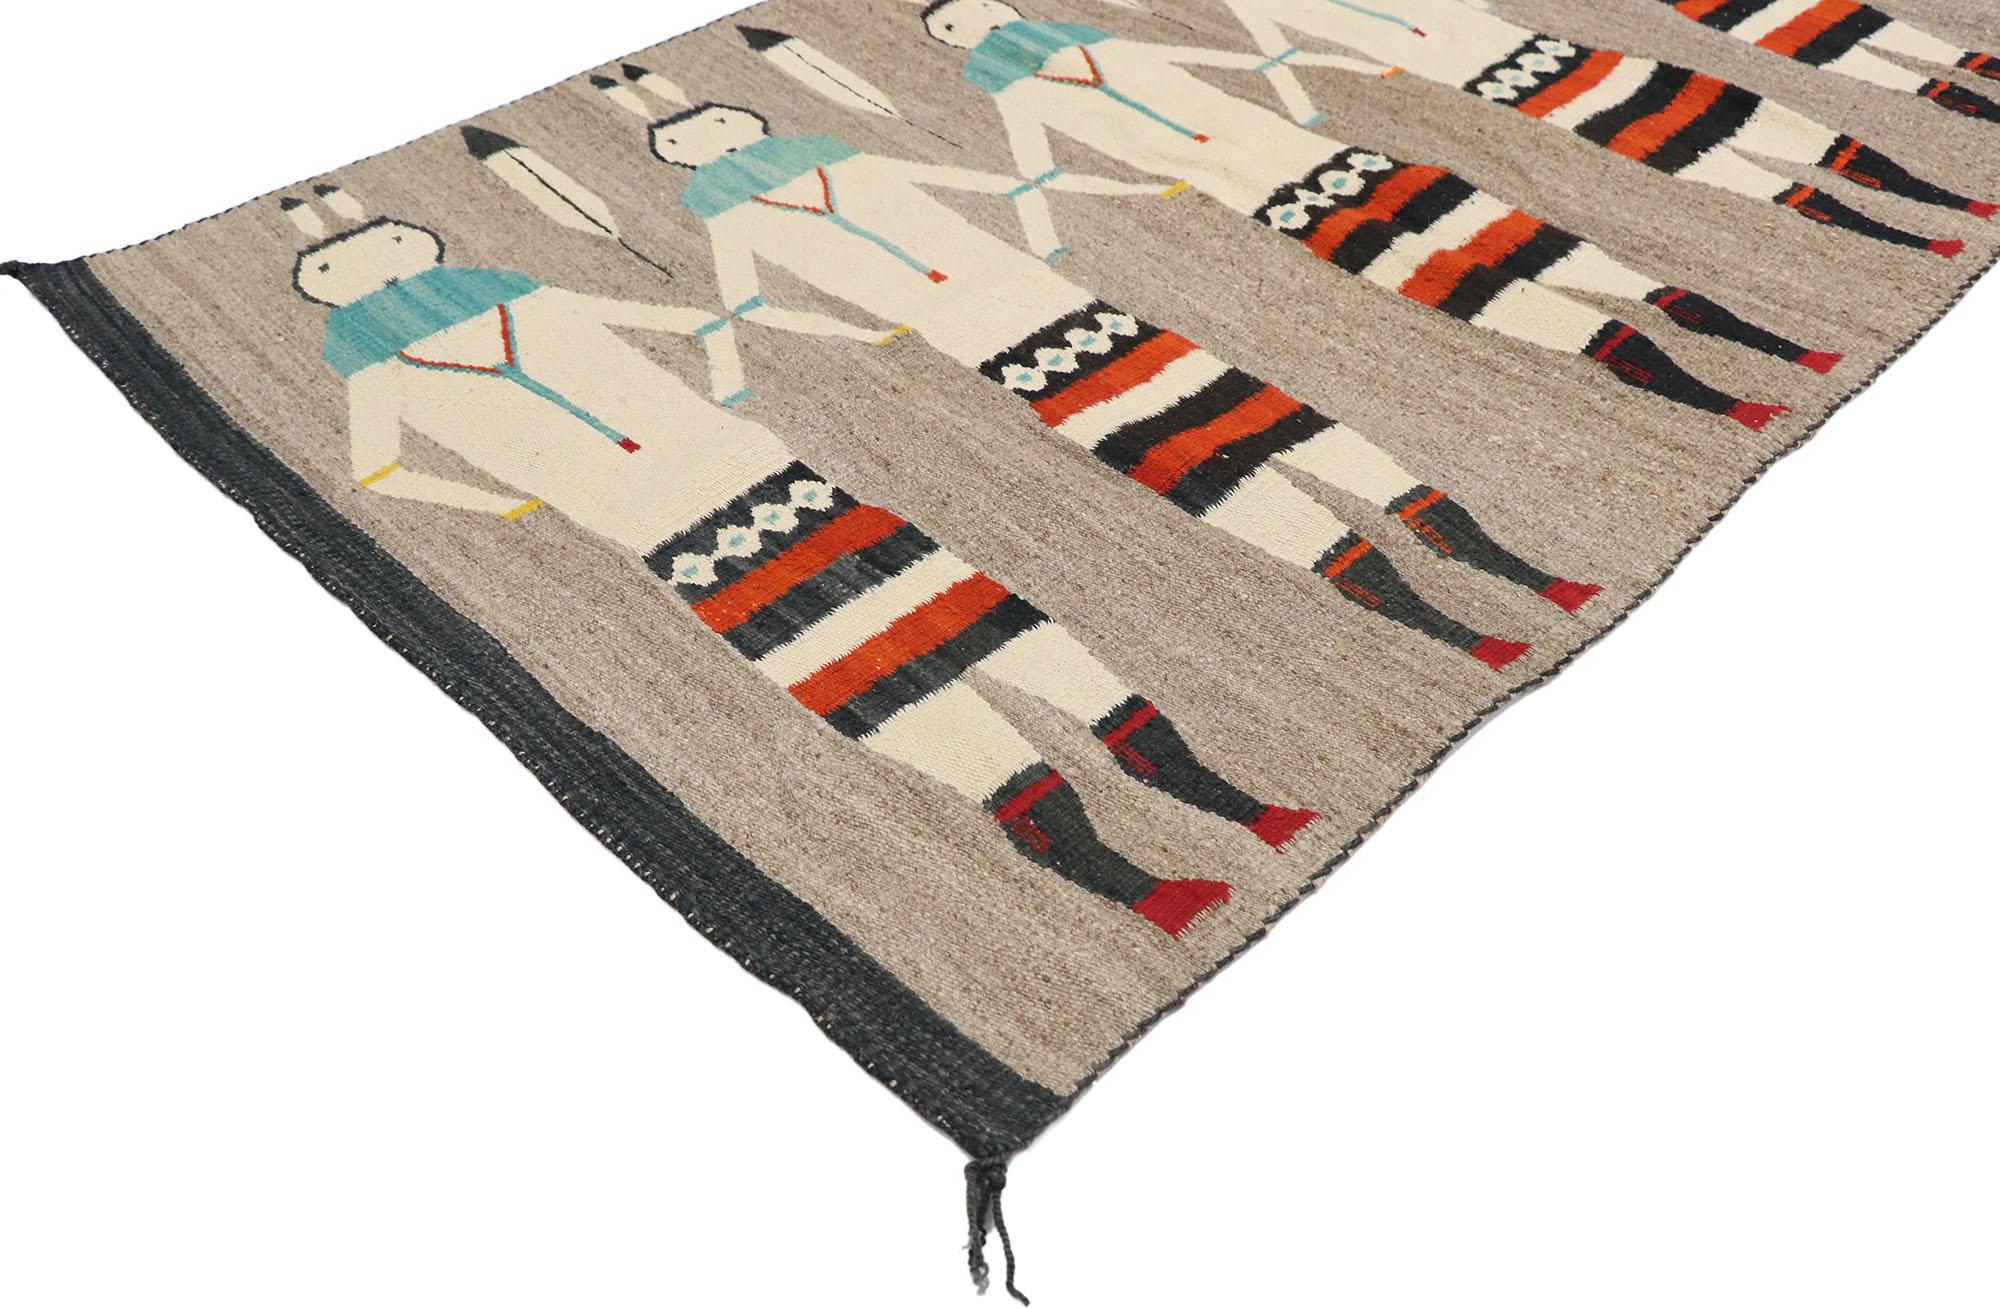 77768 Vintage Navajo Kilim Yeibichai rug with Southwestern Folk Art Style 02'11 x 04'04. Full of tiny details and a bold expressive design combined with vibrant colors and tribal style, this hand-woven wool vintage Navajo kilim Yeibichai rug is a